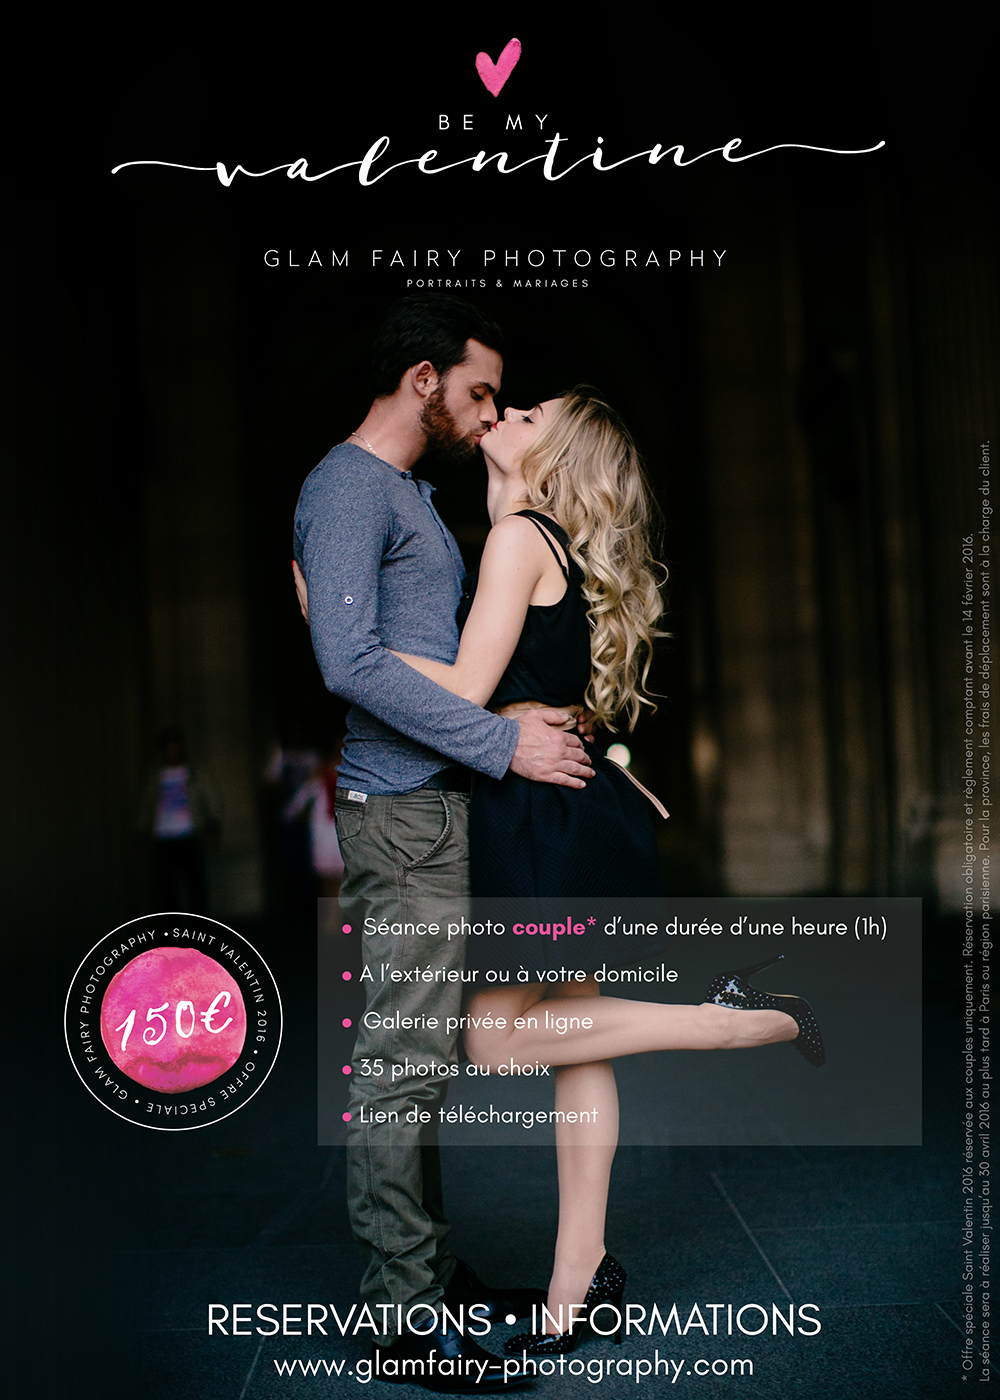 Glam-Fairy-Photography-Offre-speciale-saint-valentin-2016